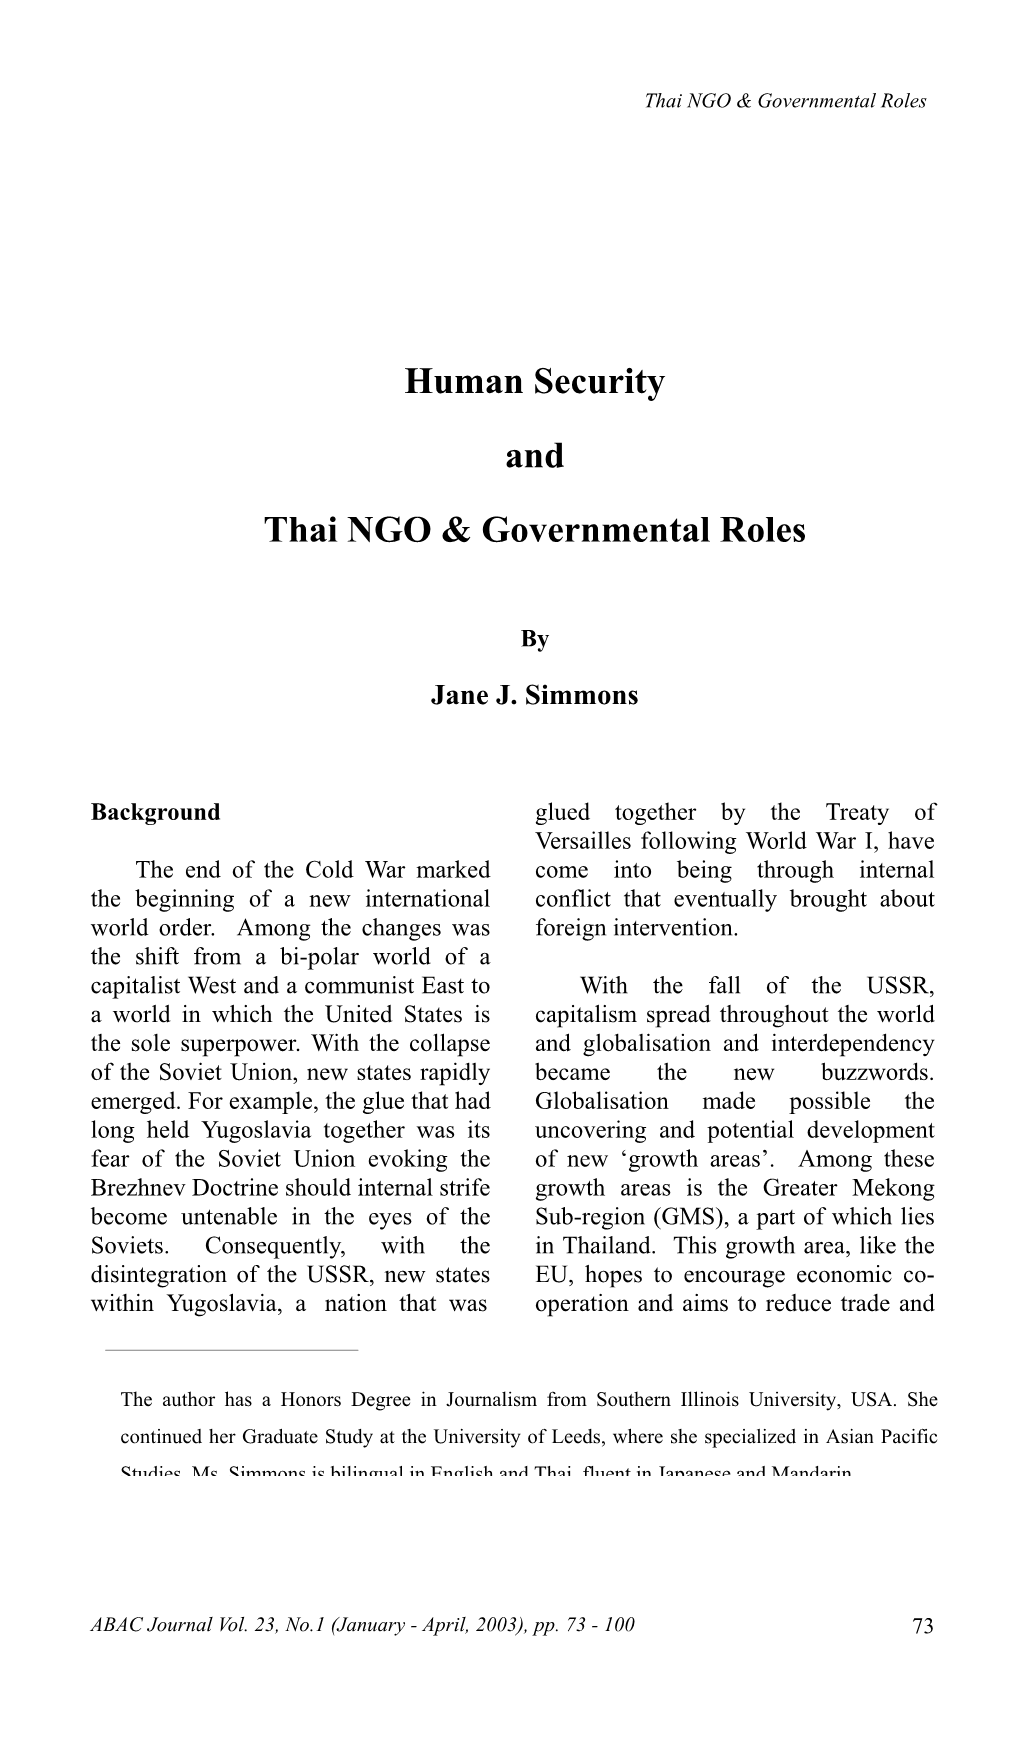 Human Security and Thai NGO & Governmental Roles